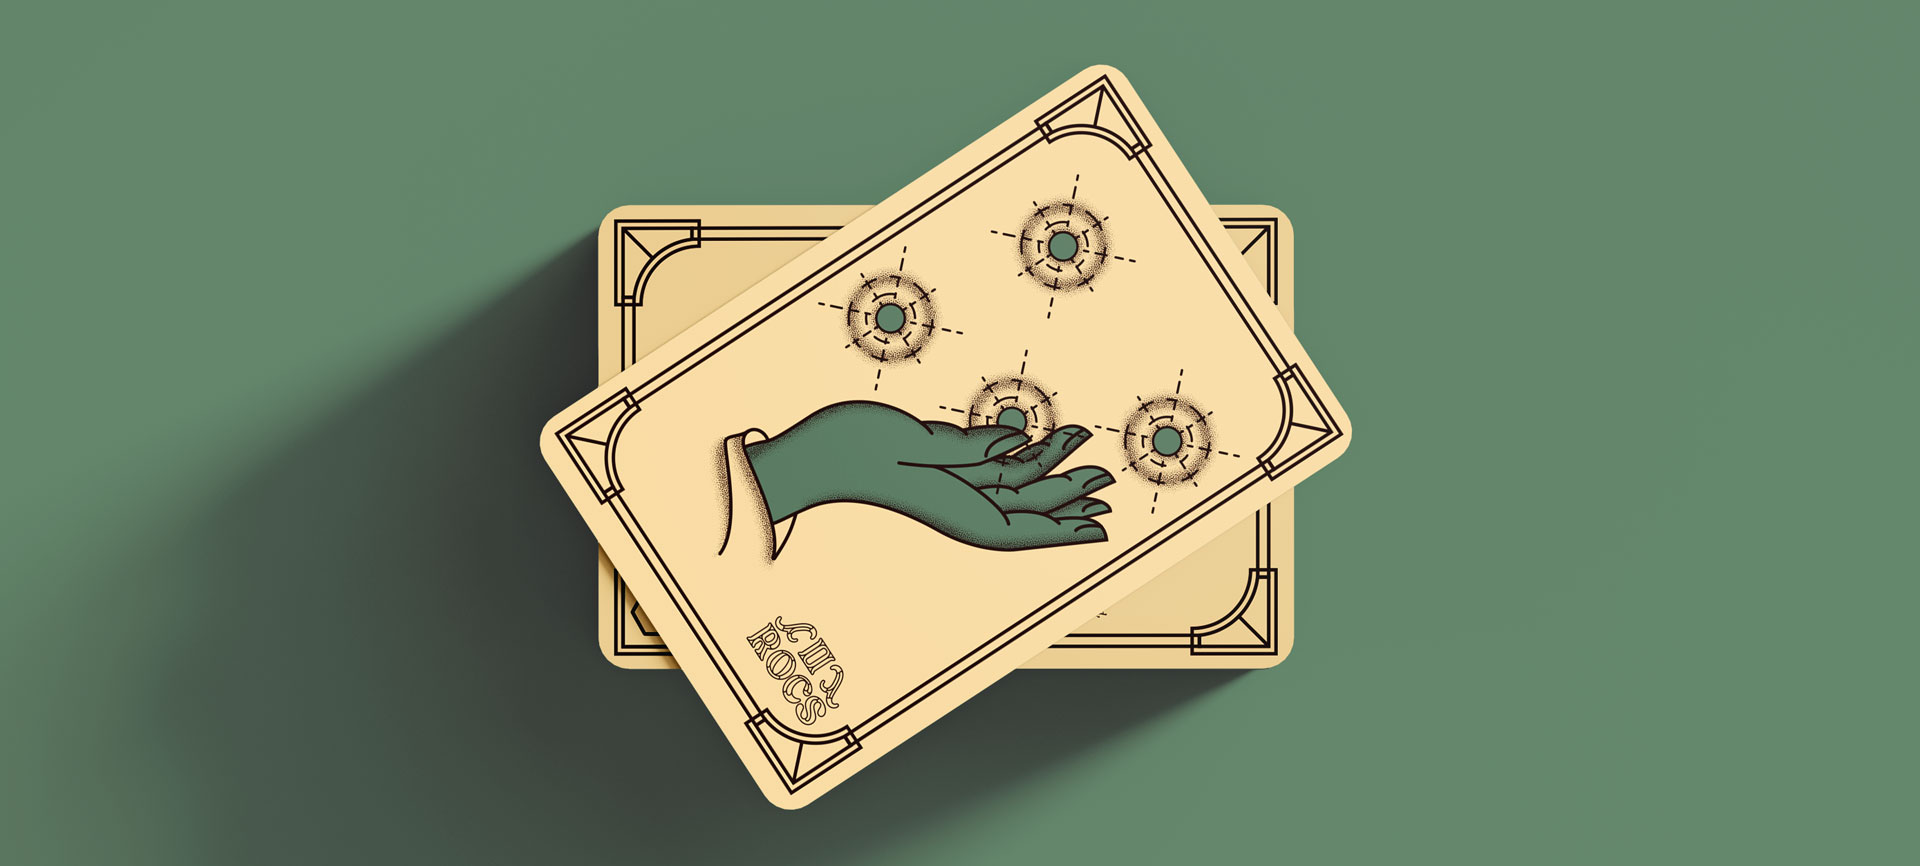 stack of cards with an illustration of a hand casting a spell